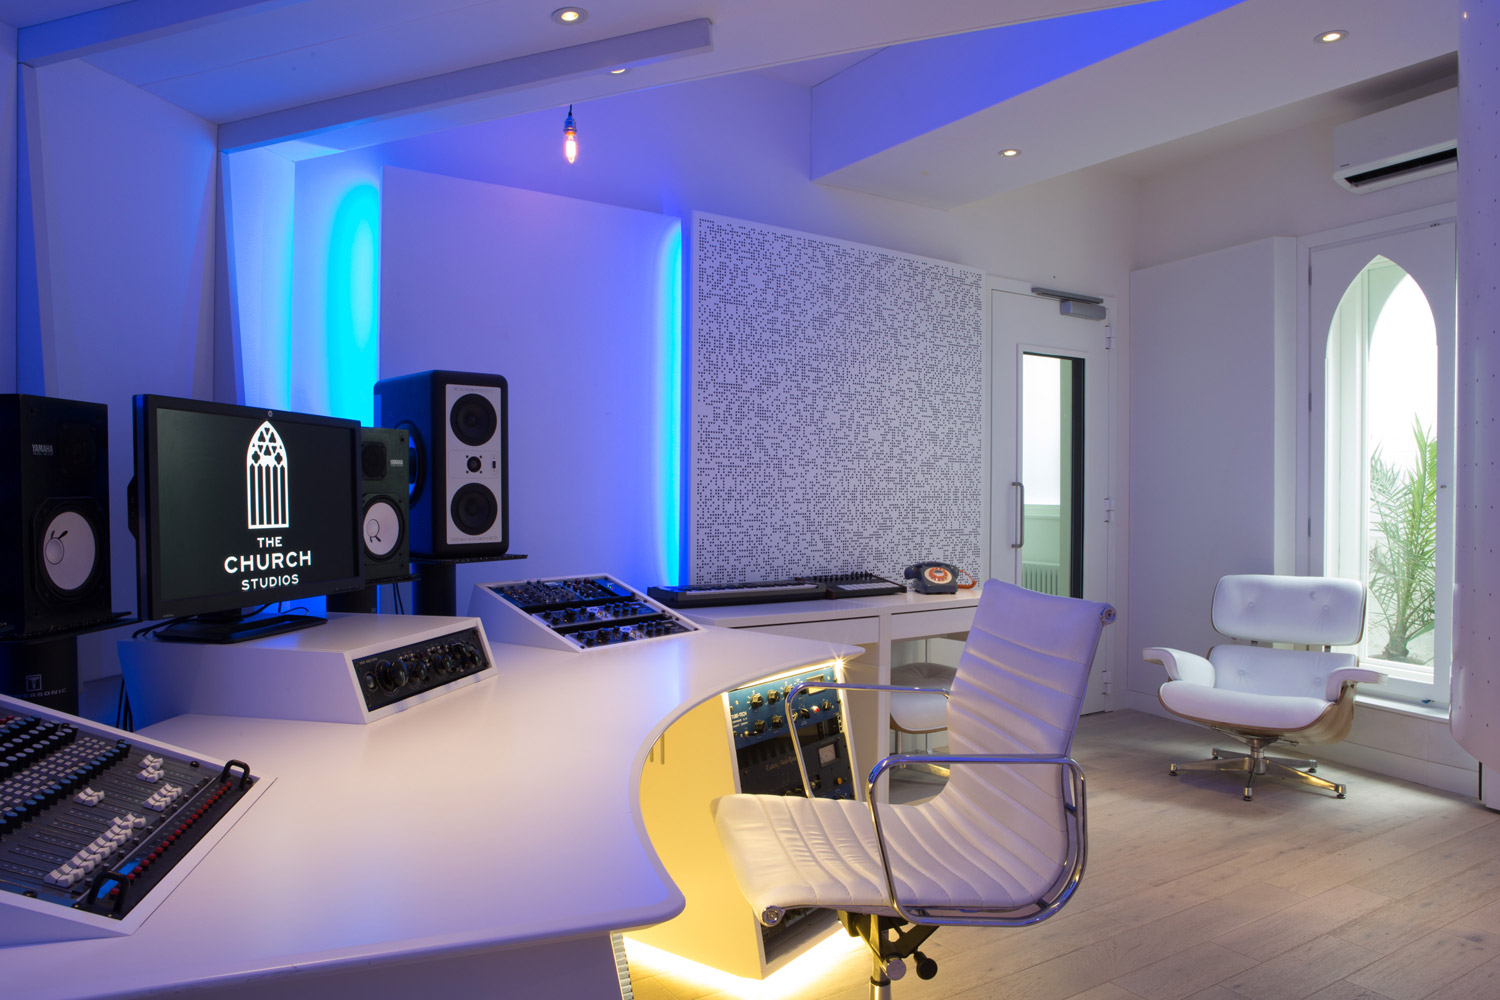 The Church Studios - Paul Epworth, London. Production Suite designed by WSDG